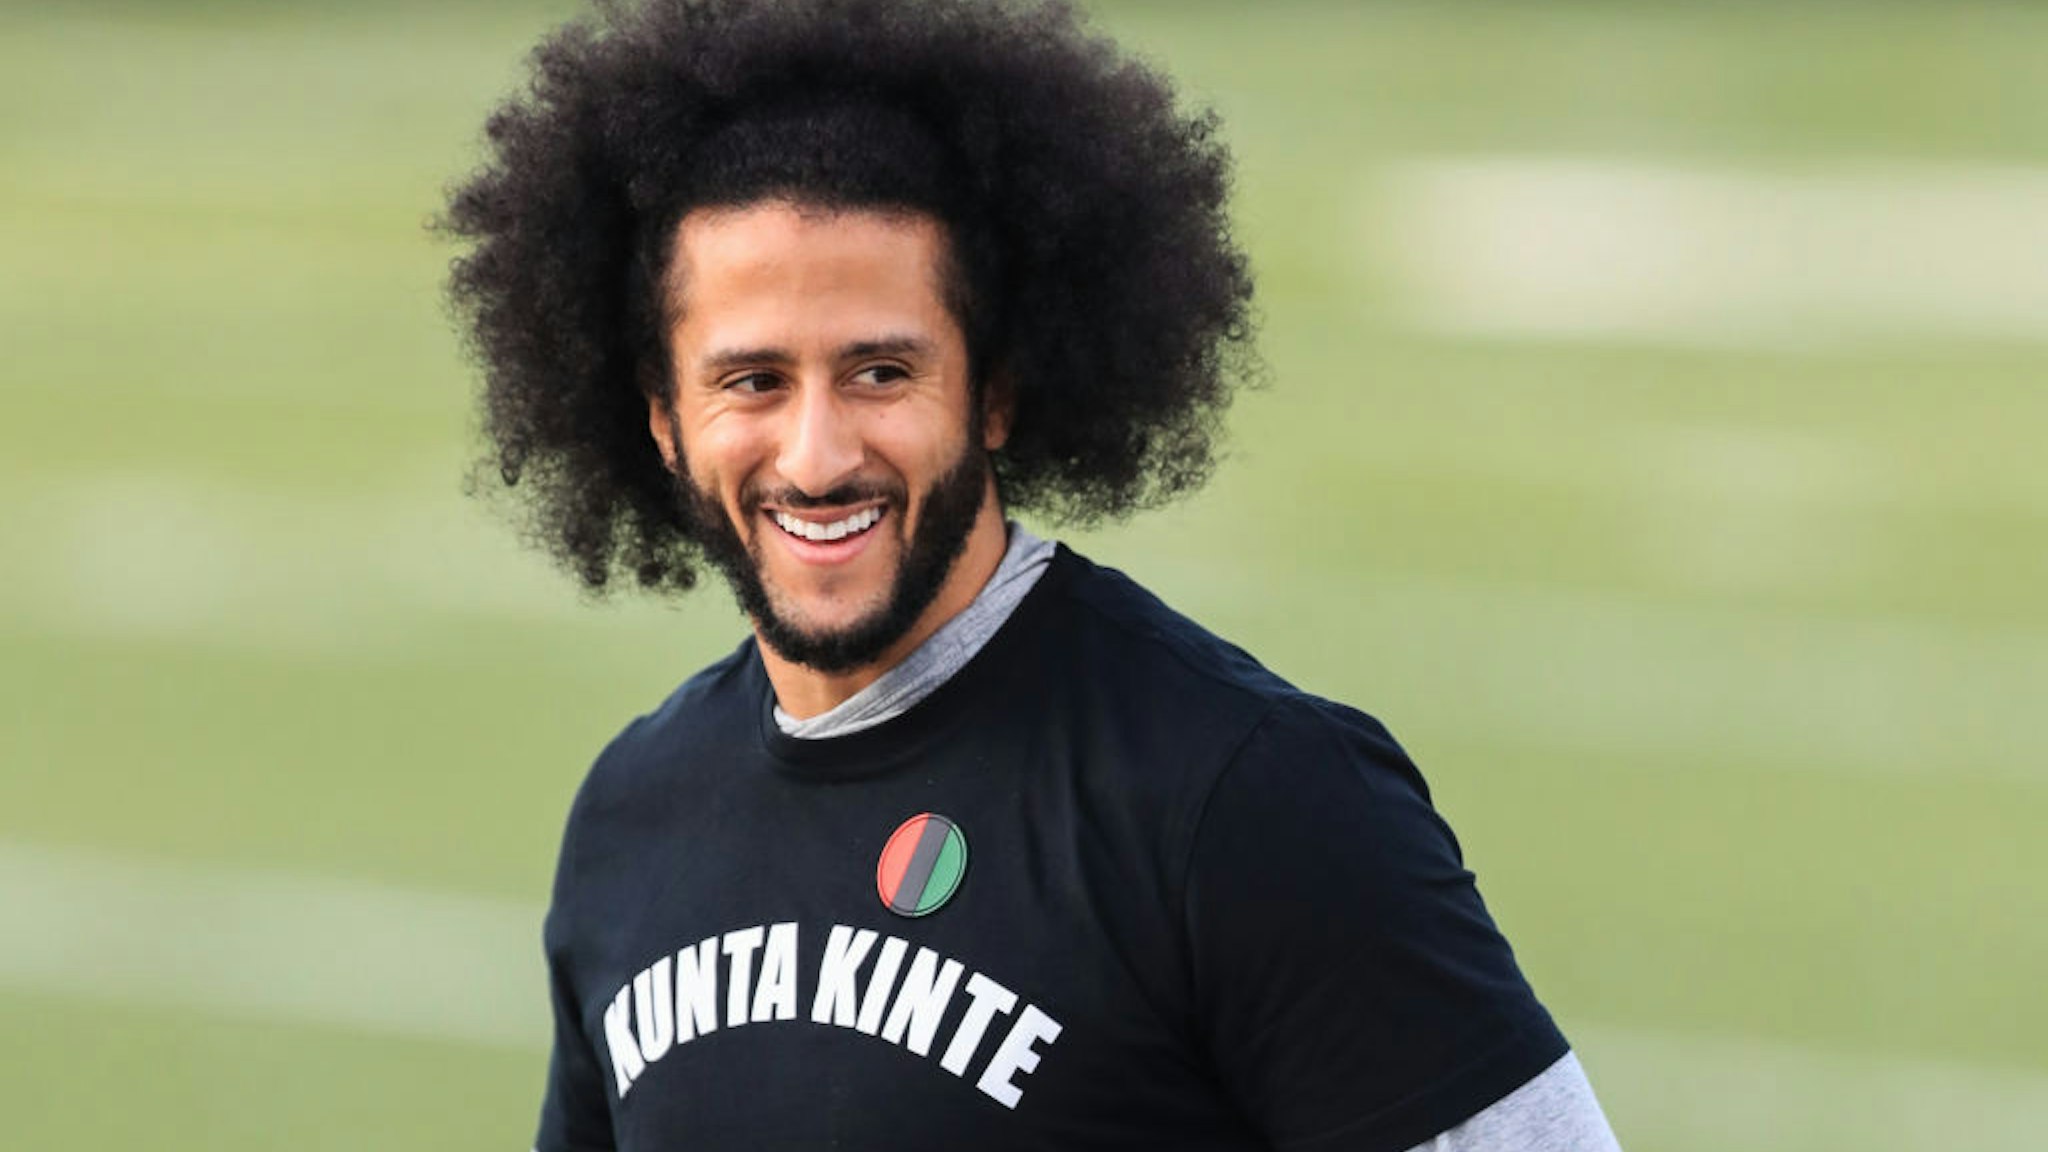 Colin Kaepernick looks on during a private NFL workout held at Charles R Drew high school on November 16, 2019 in Riverdale, Georgia.